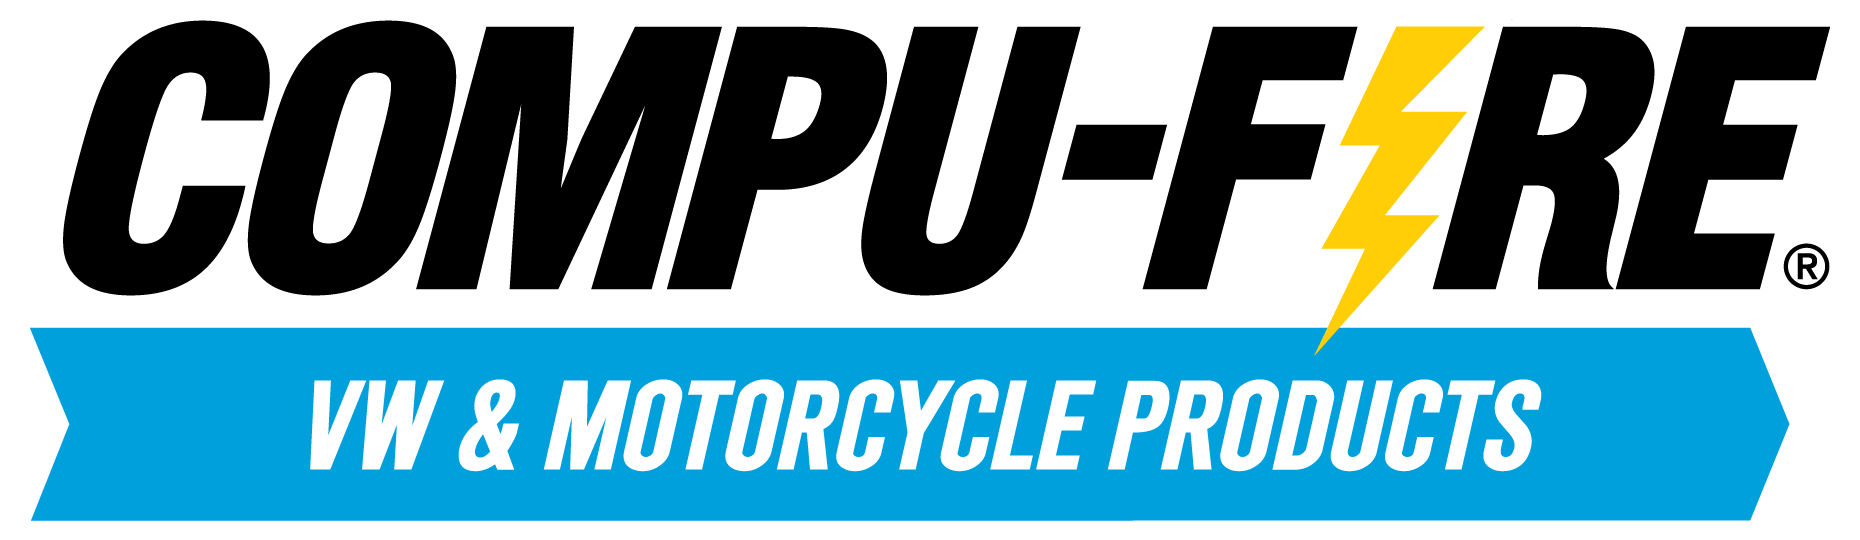 Compu-Fire Motocycle Products Logo.png